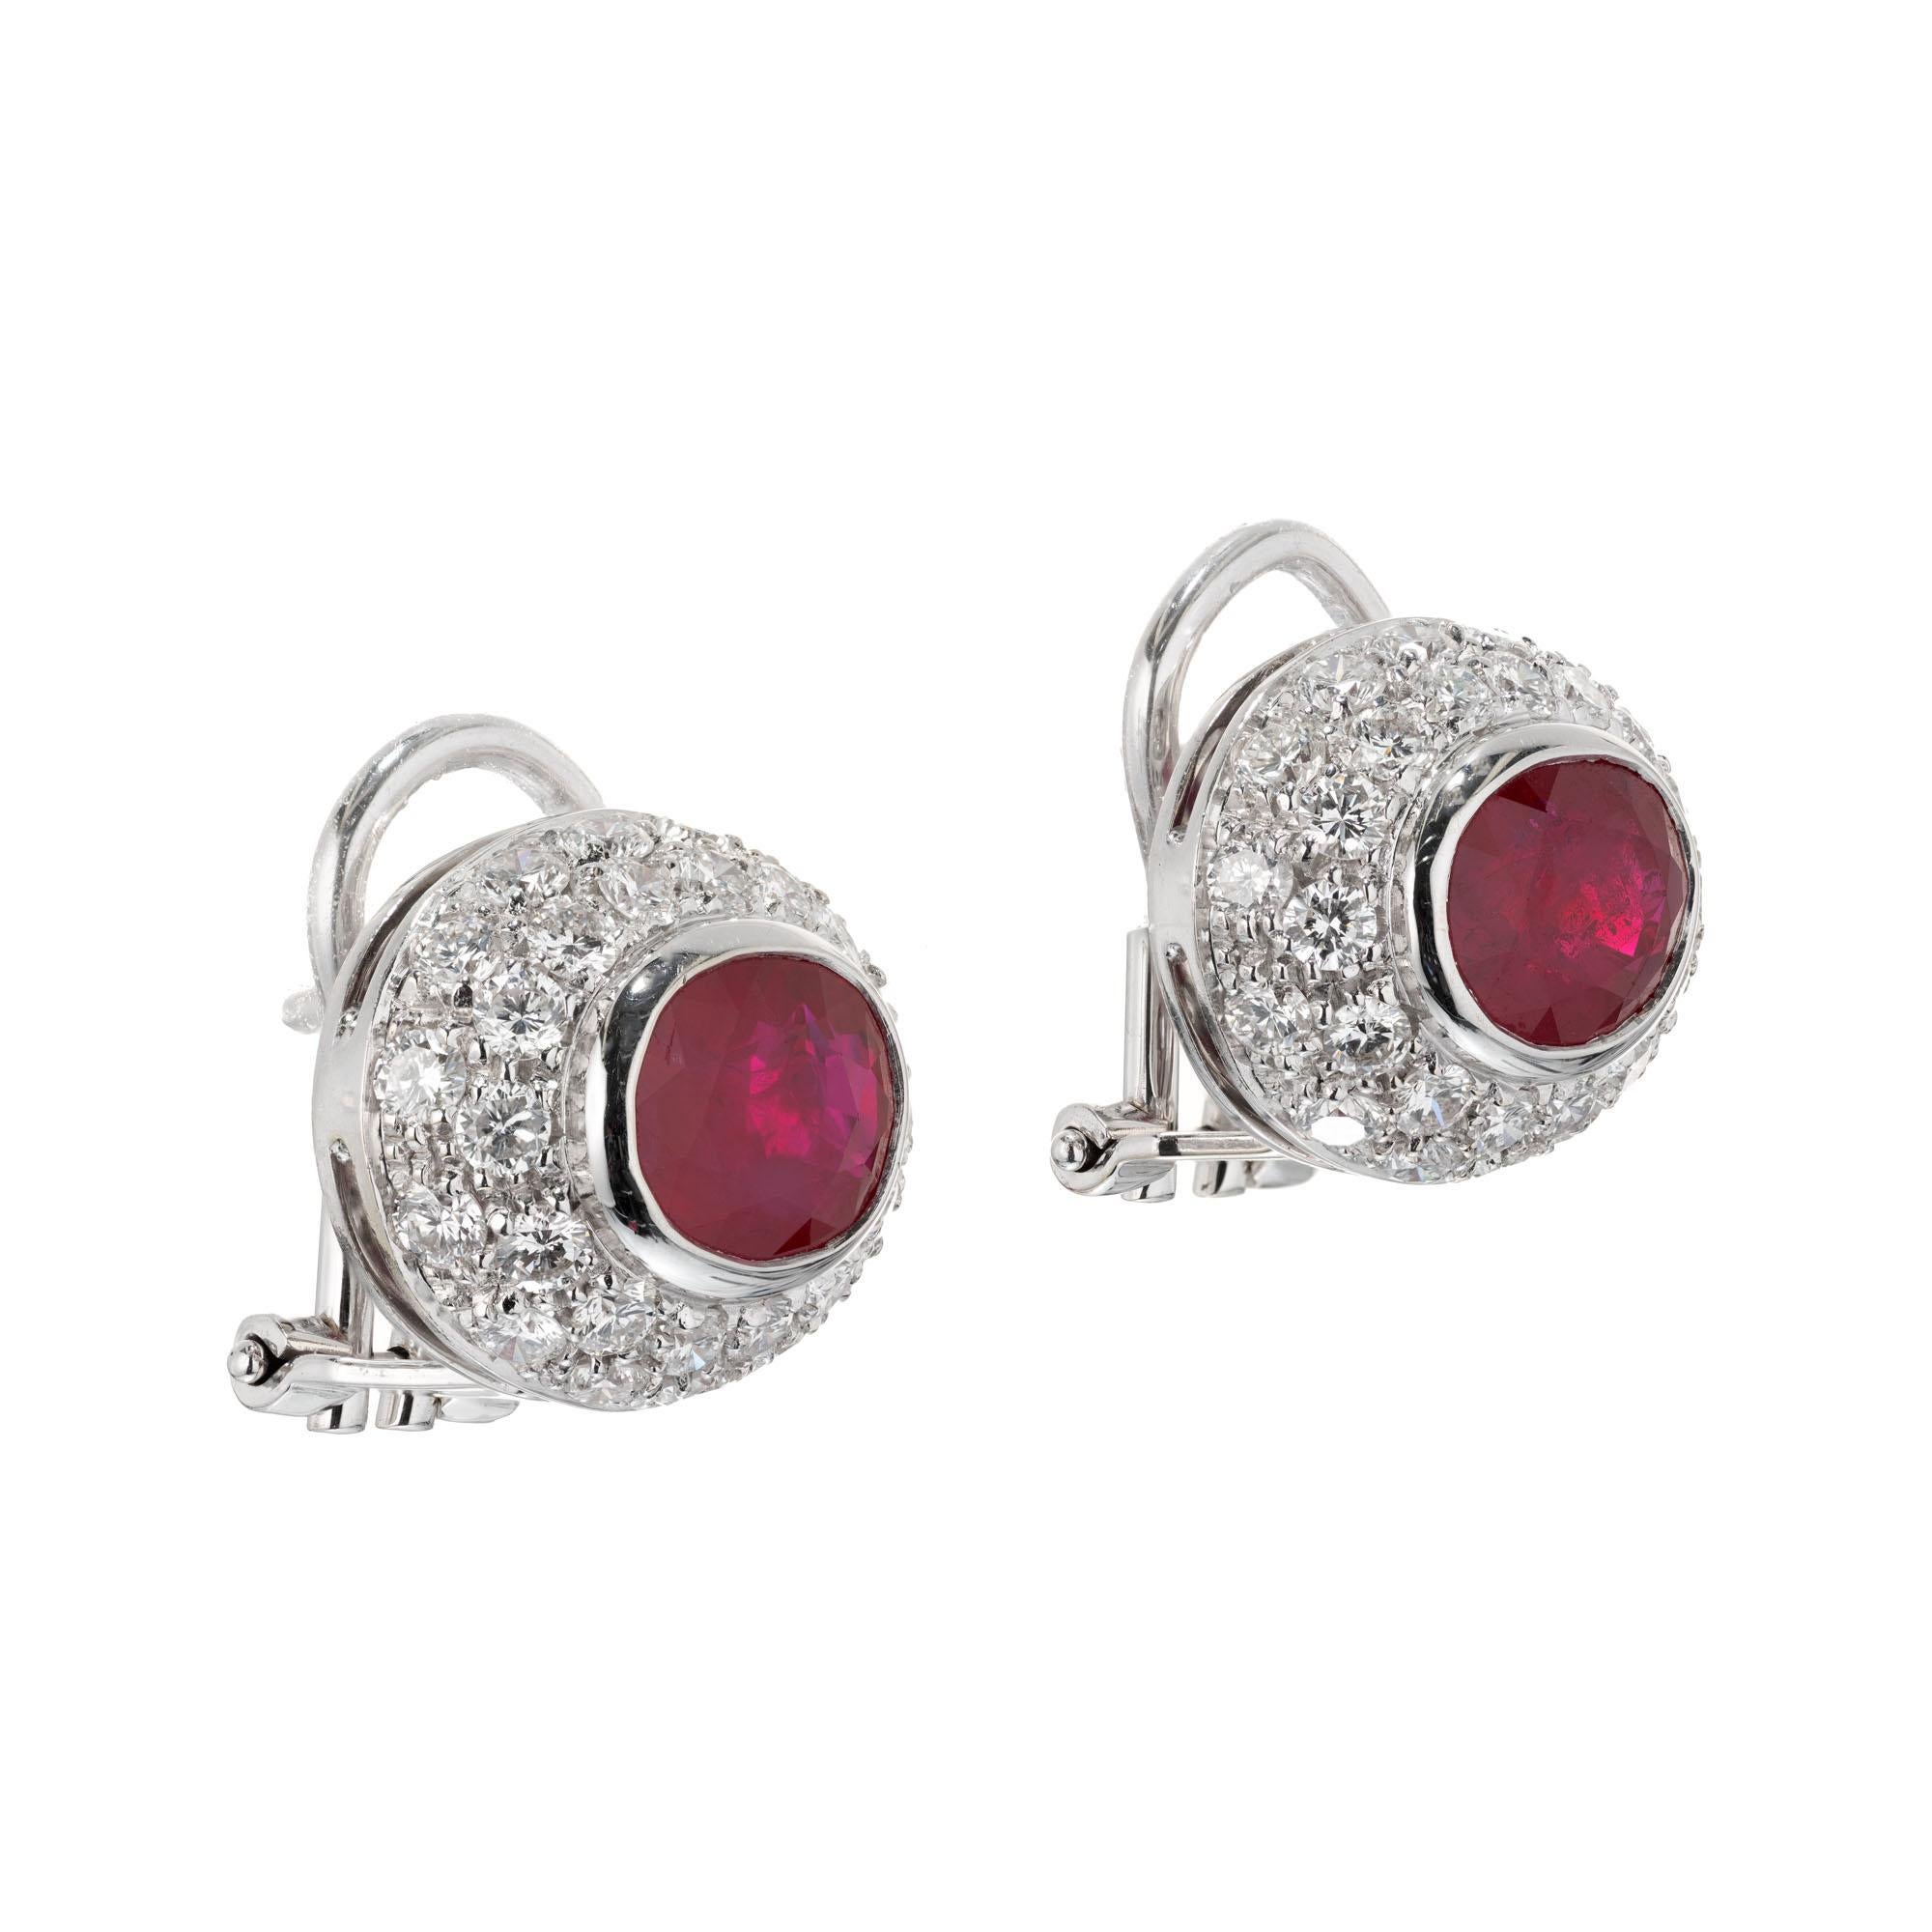 Oval domed ruby and diamond pave halo 18k white gold clip post earrings. 

2 oval 8 x 6mm Rubies approx. total weight 3.10cts. 
60 round diamonds approx. total weight 2.00cts, F to G, VS. 
Stamped:750 WG. 
9.0 grams.
Length: 15mm. 
Width: